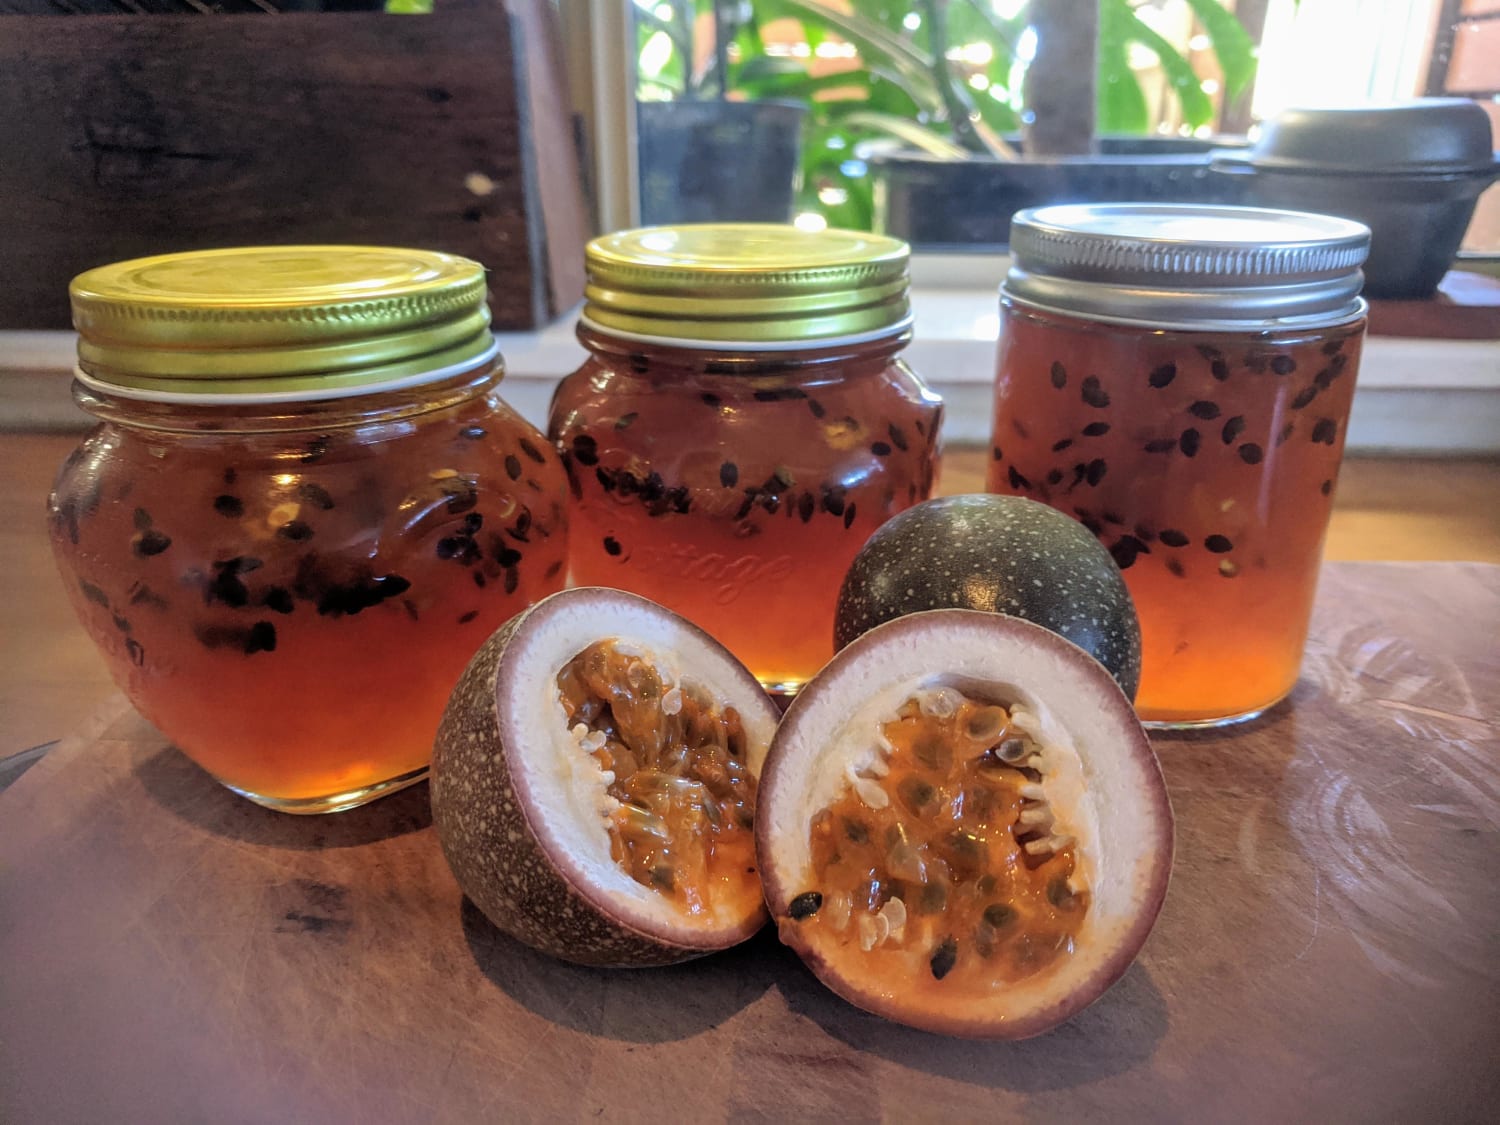 Sunshine in a jar, my first try at passion fruit jam.